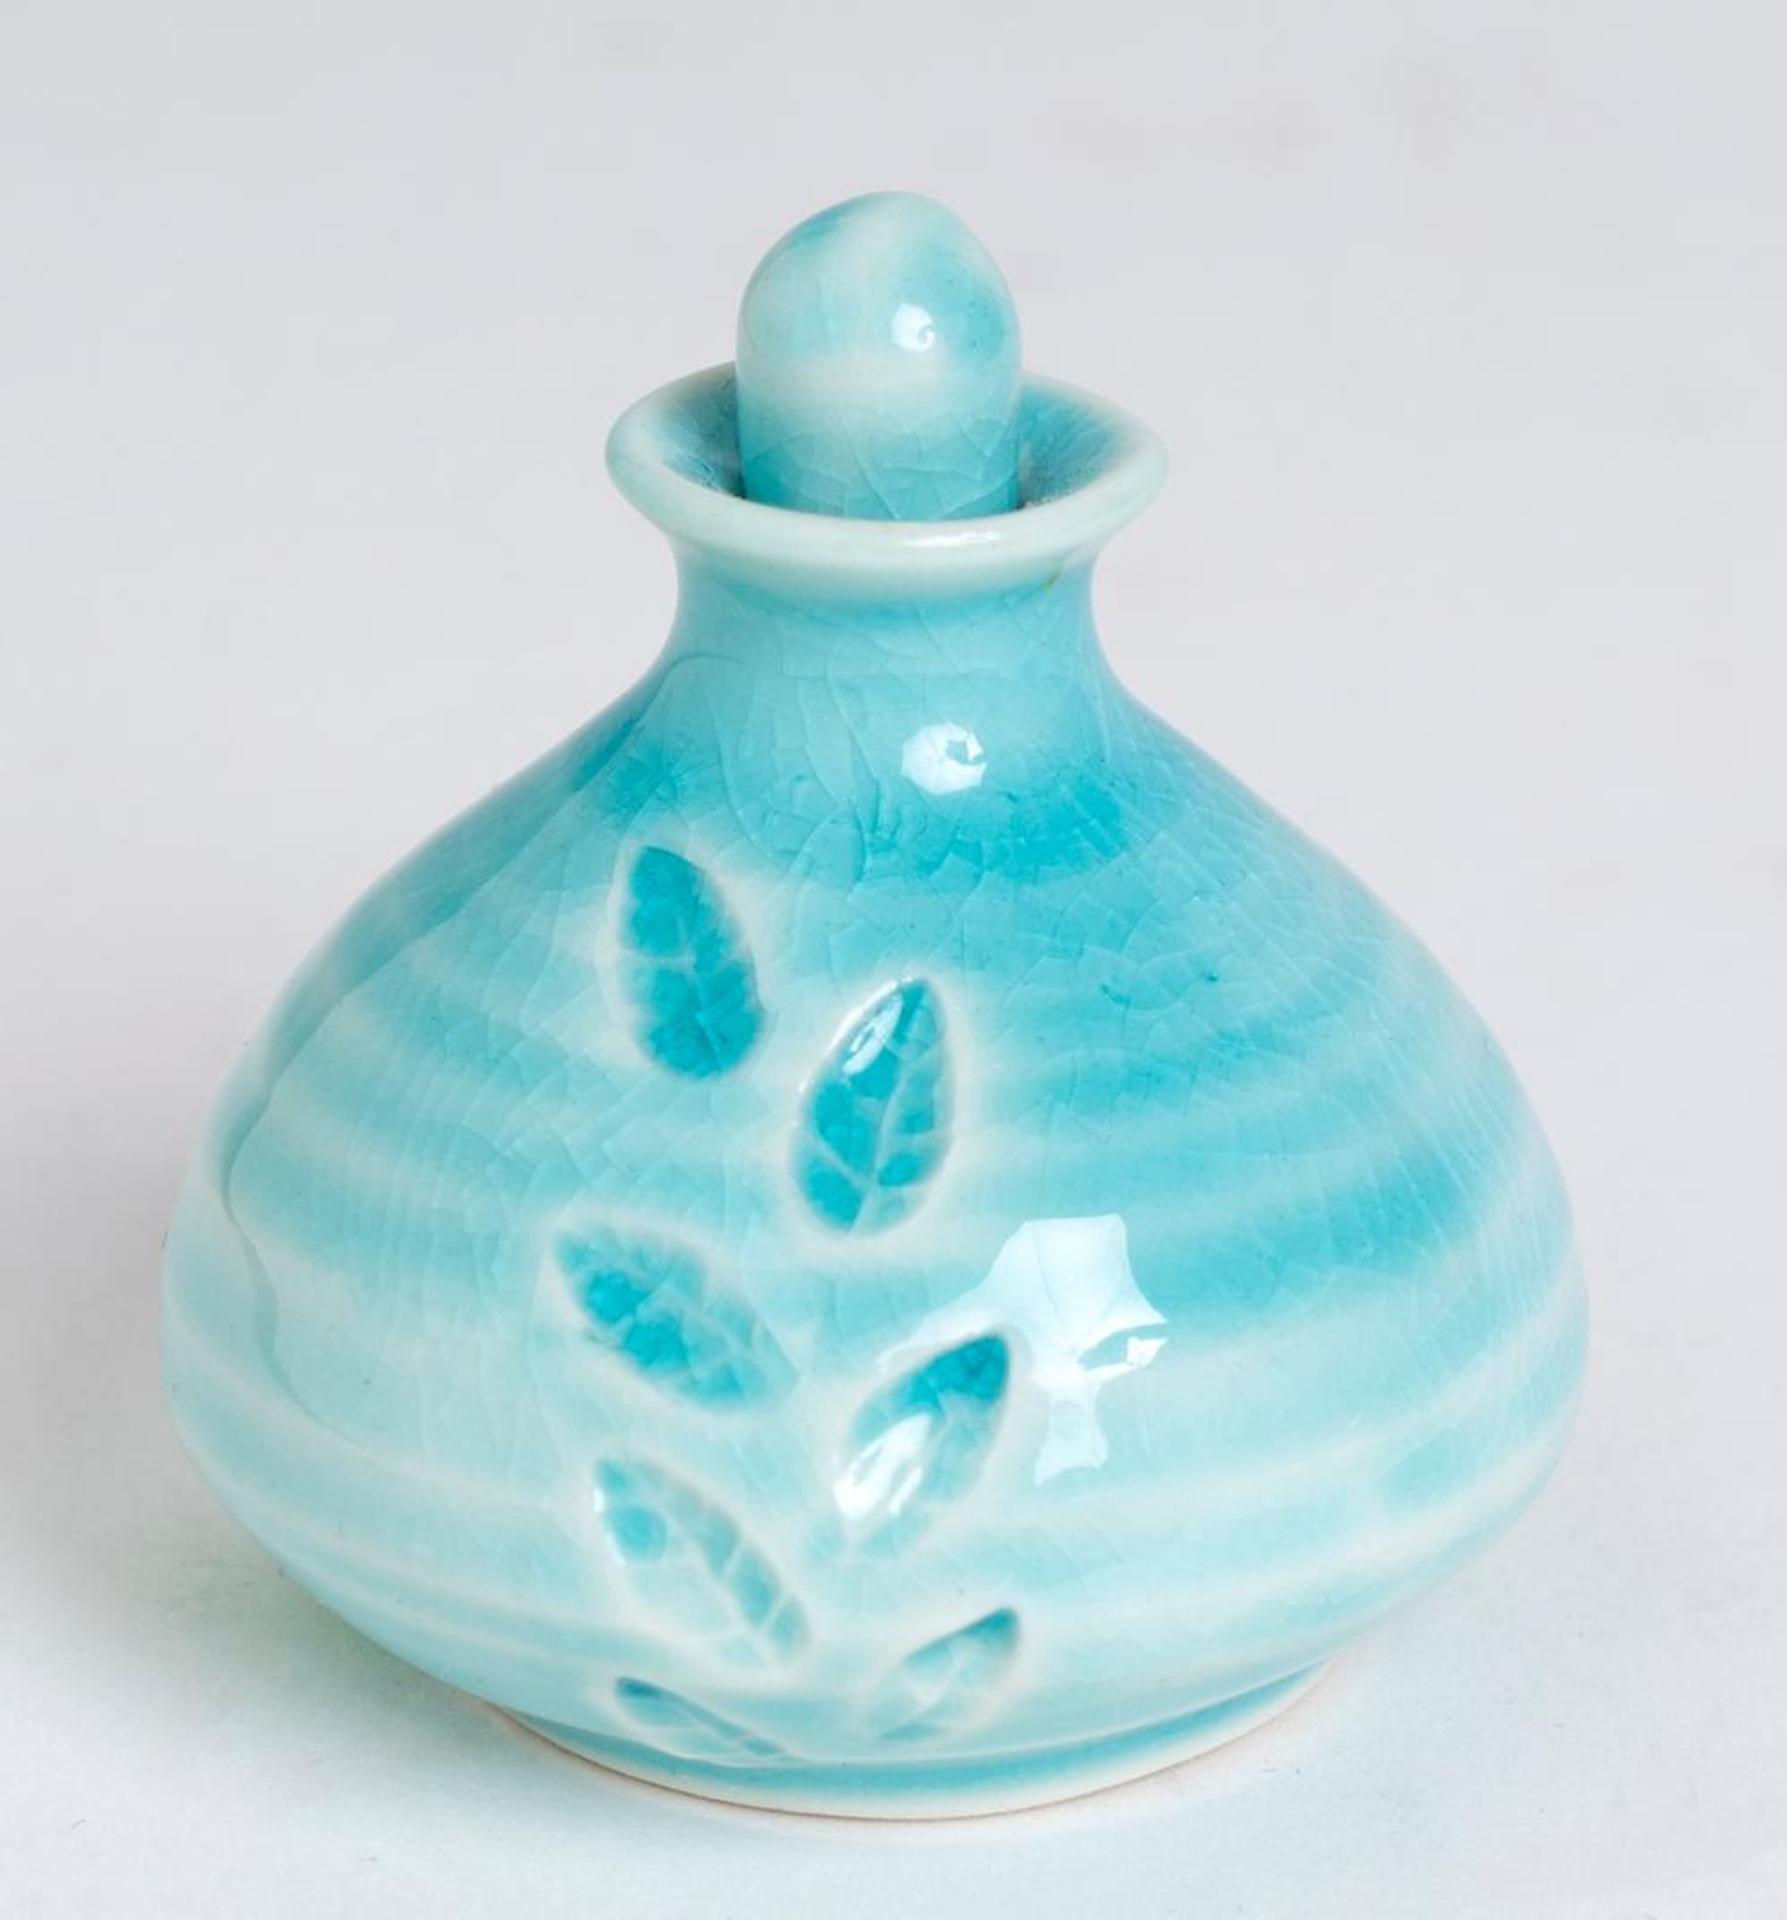 Jenn Mapplebeck (1938-2015) - Small Round Container With Stopper